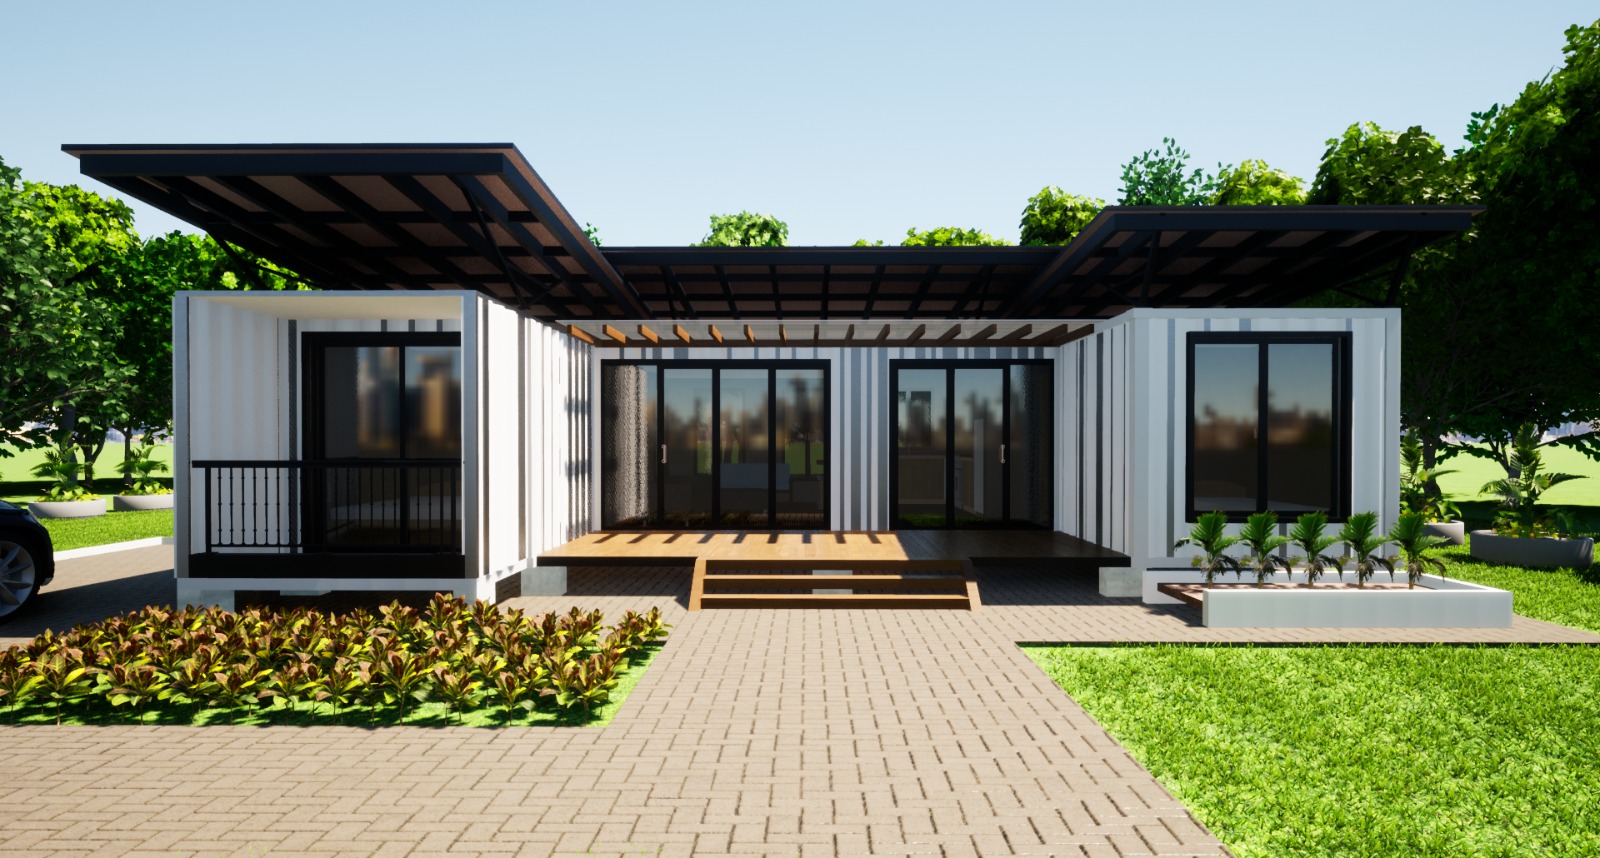 3 Bedroom Modern Container House Plan